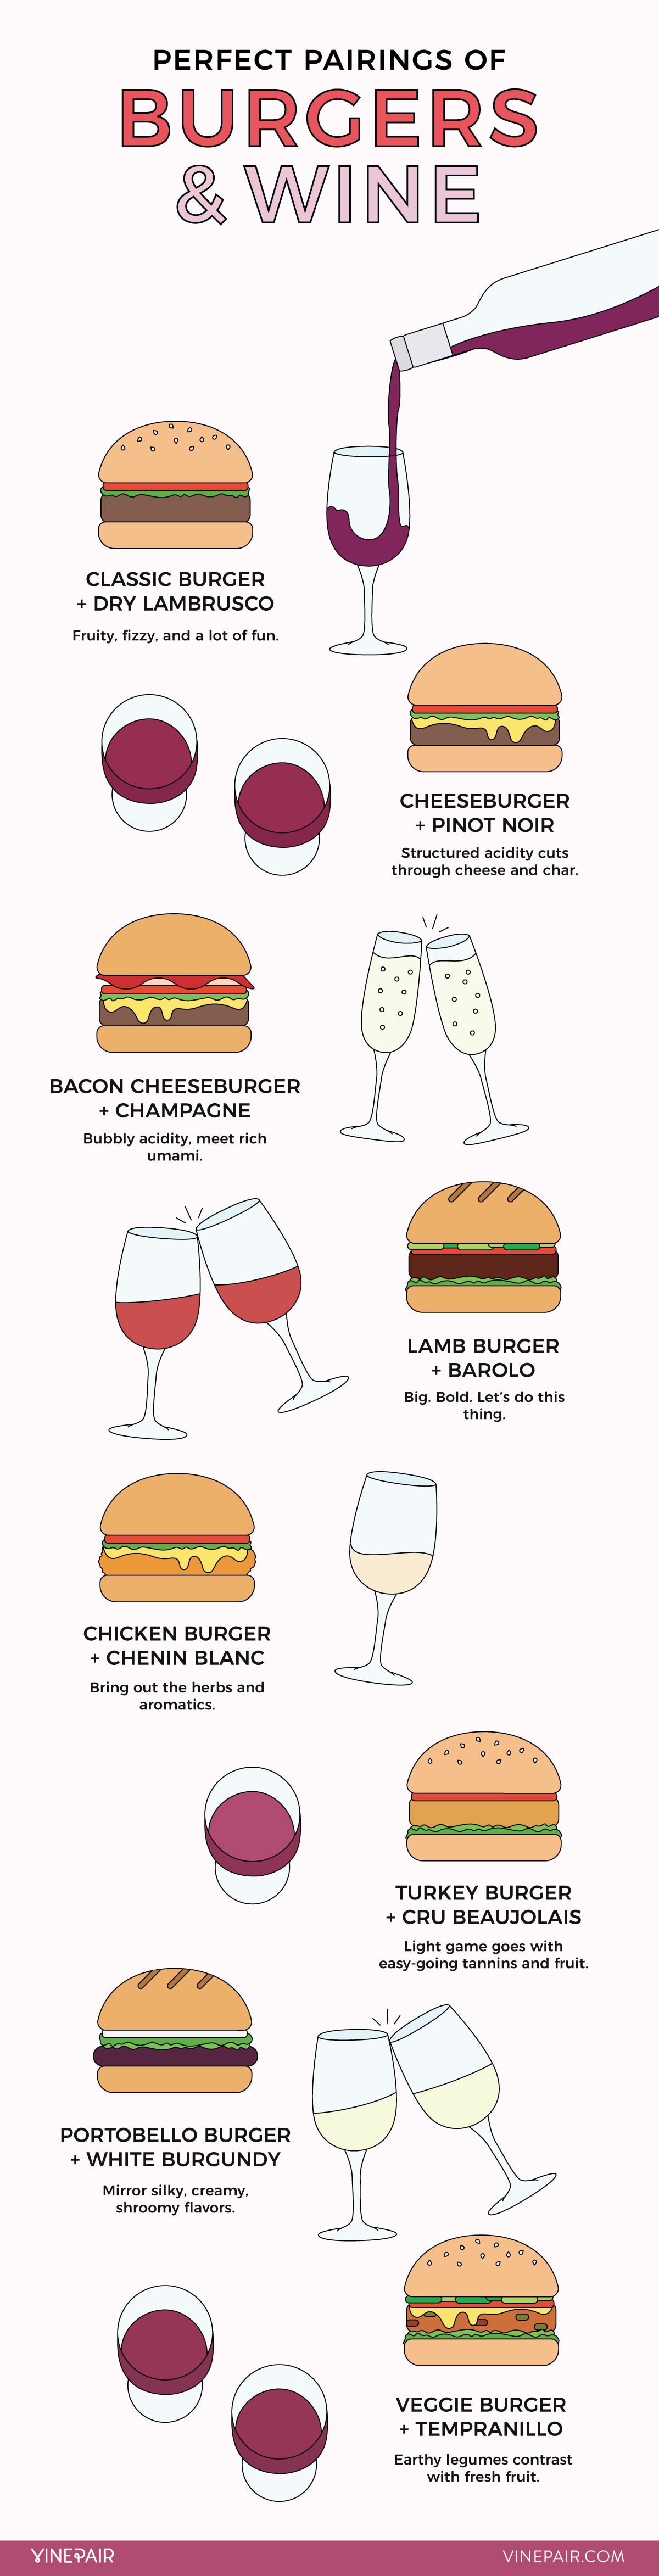 The ultimate guide to pairing burgers with wine.